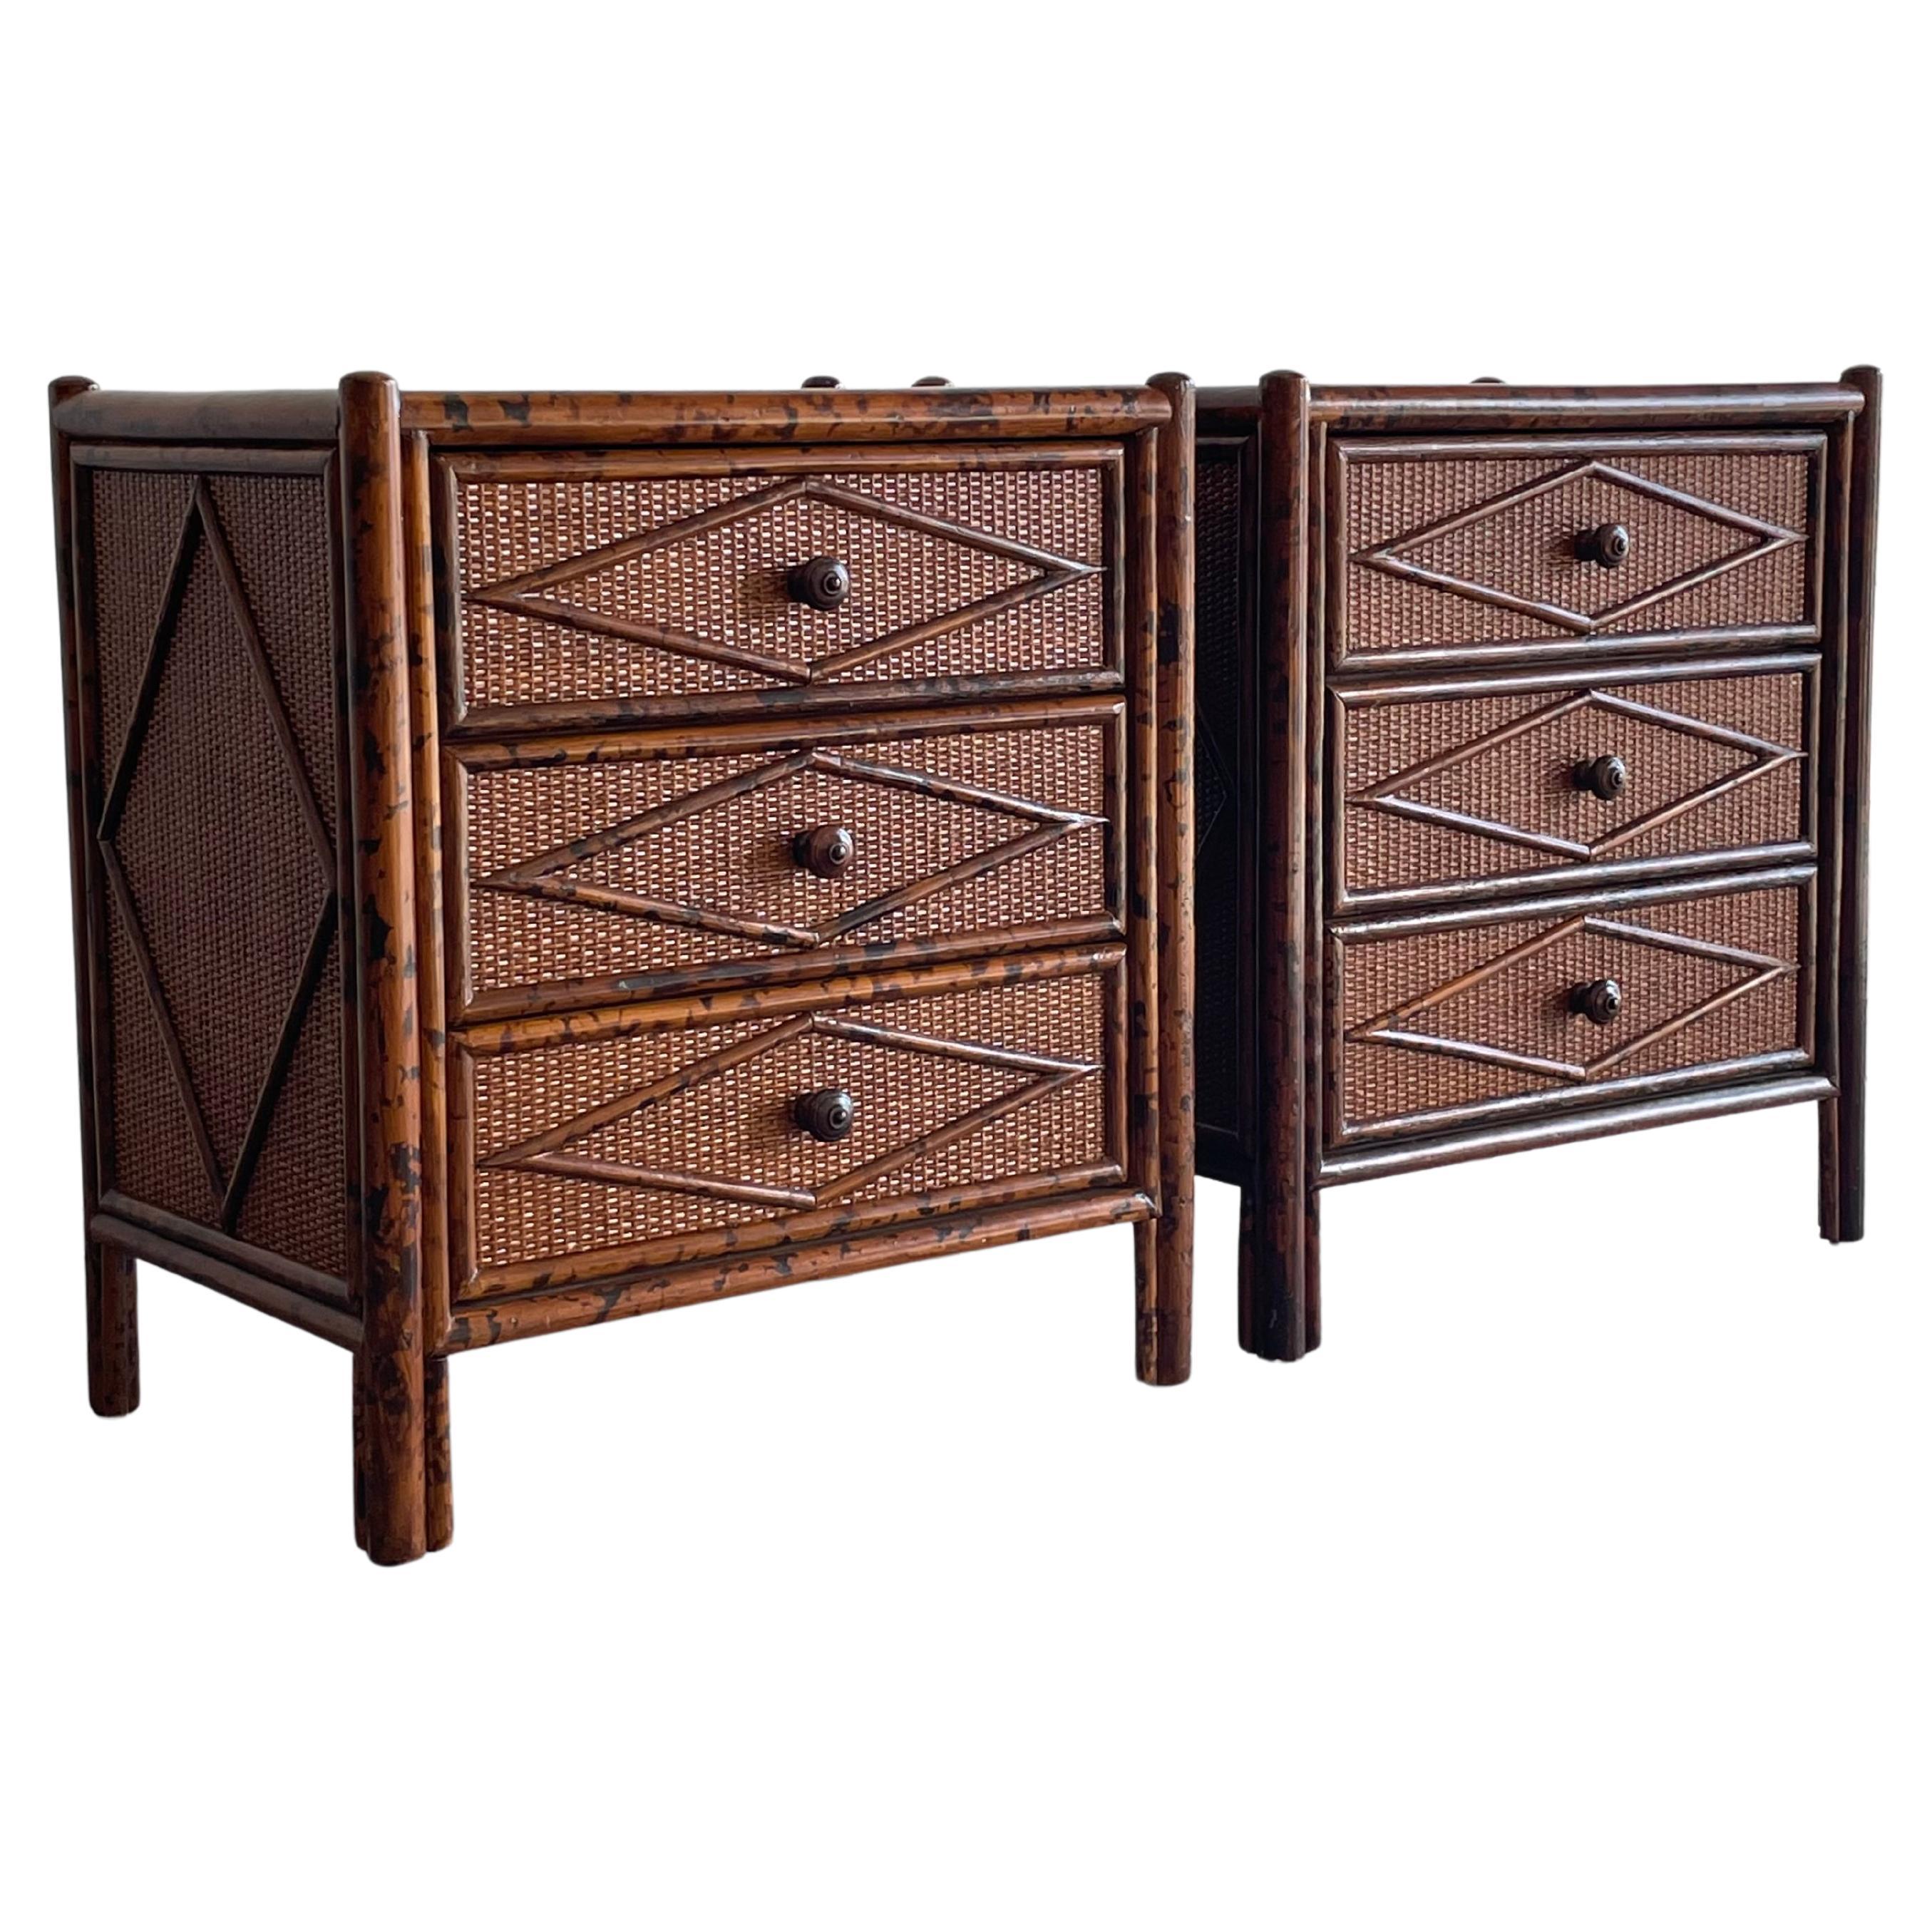 British Colonial Style Bedside Chests, British Colonial Style Dresser